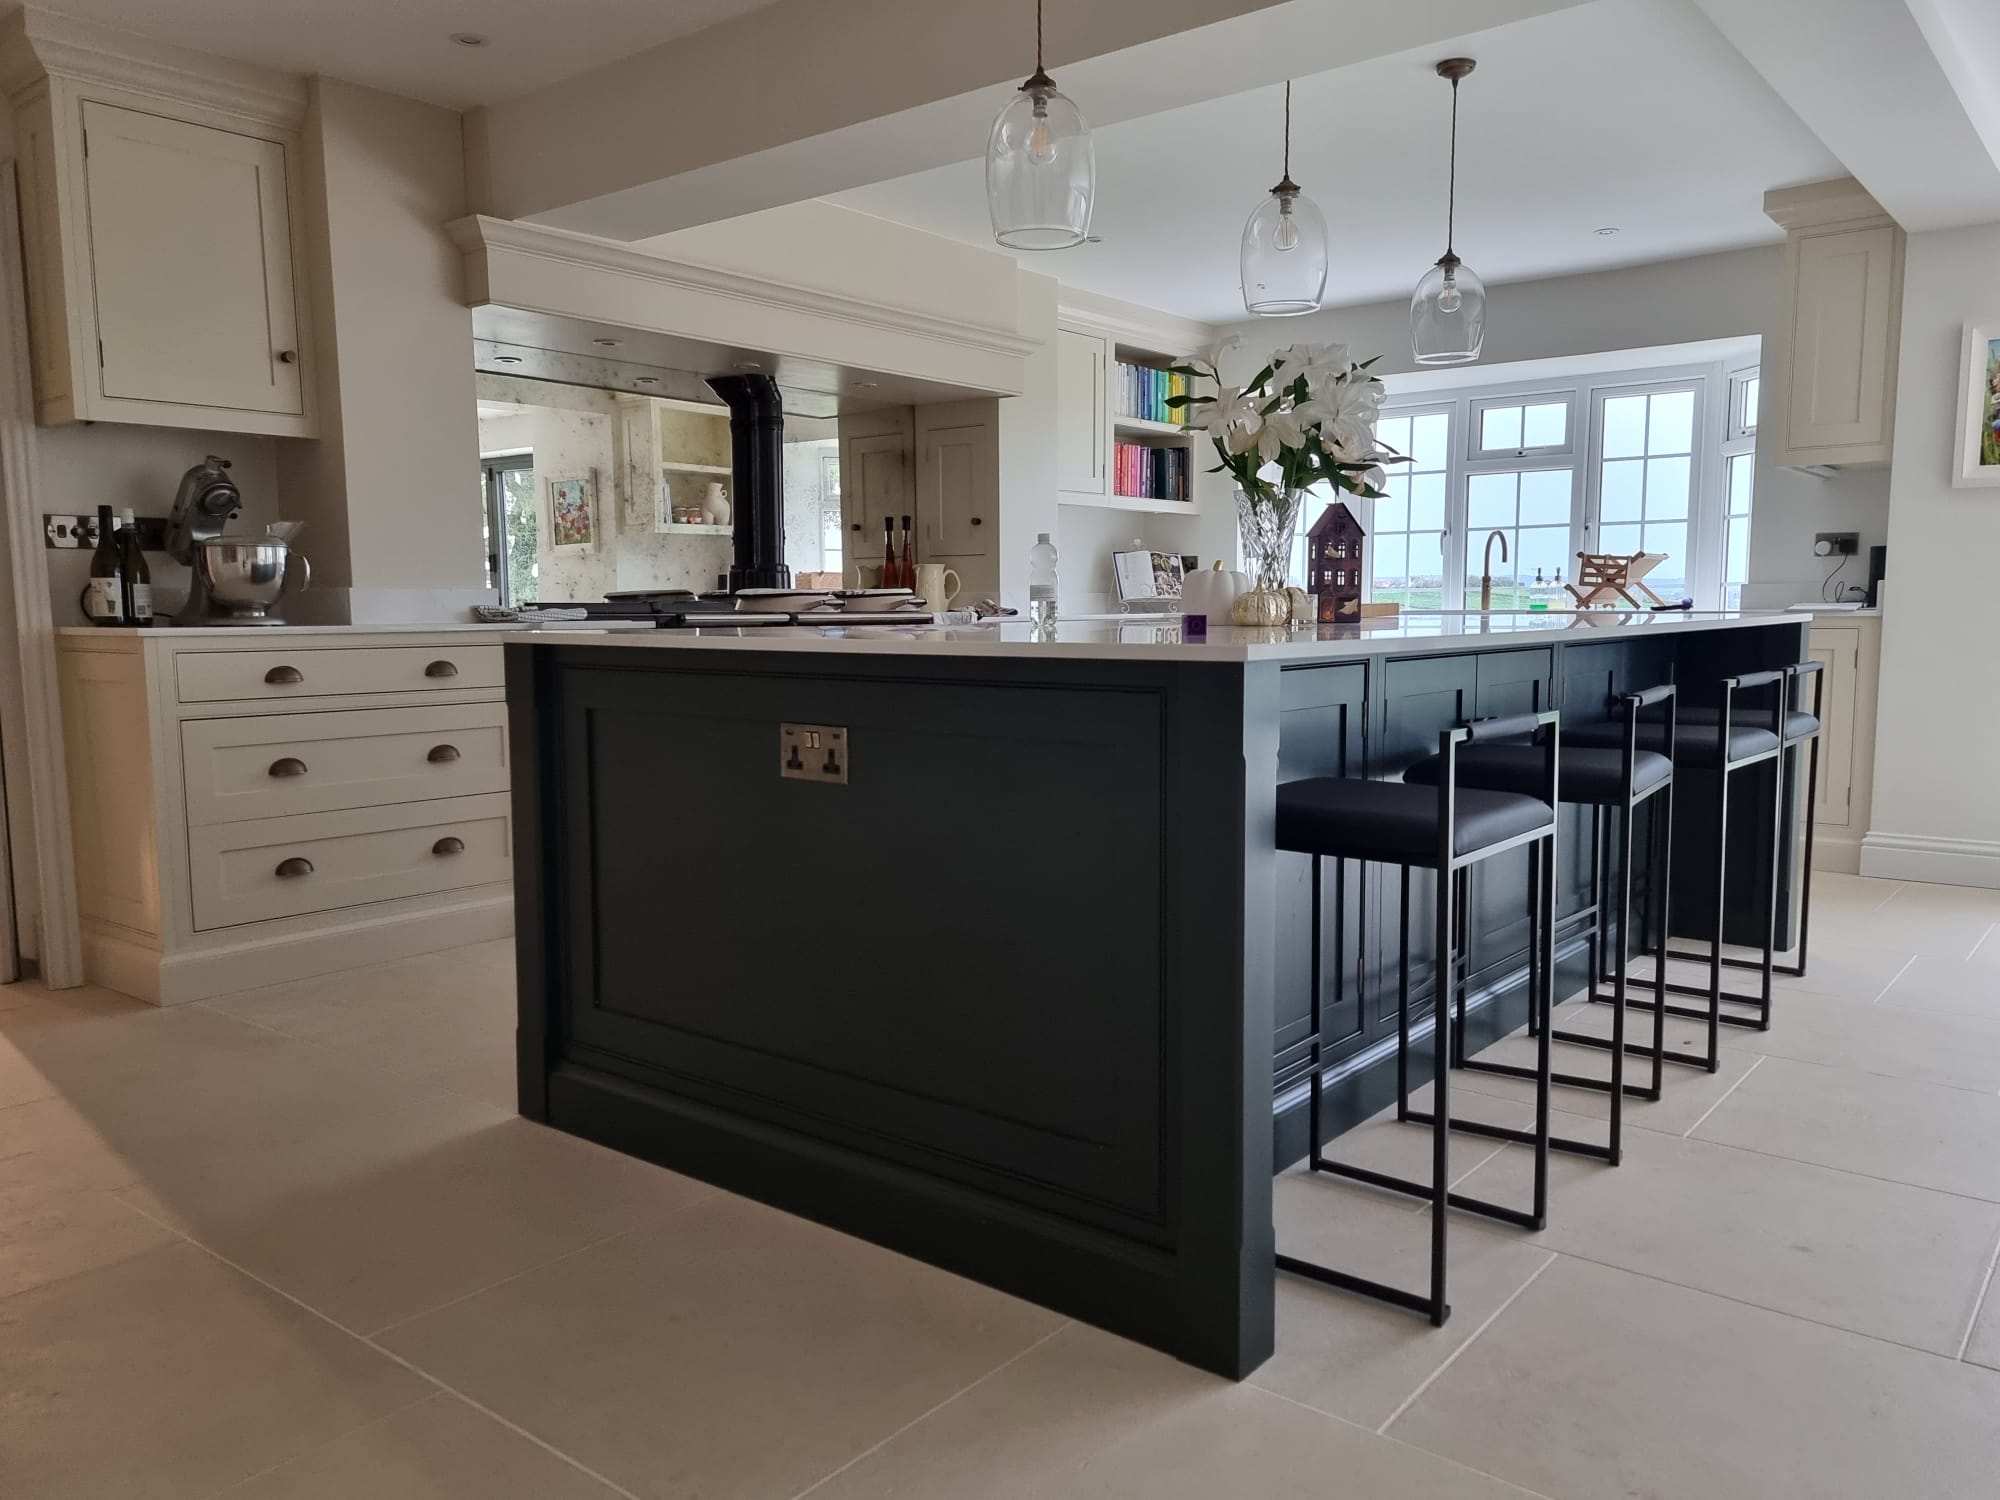 Bespoke kitchen island by Kings Stag Joinery